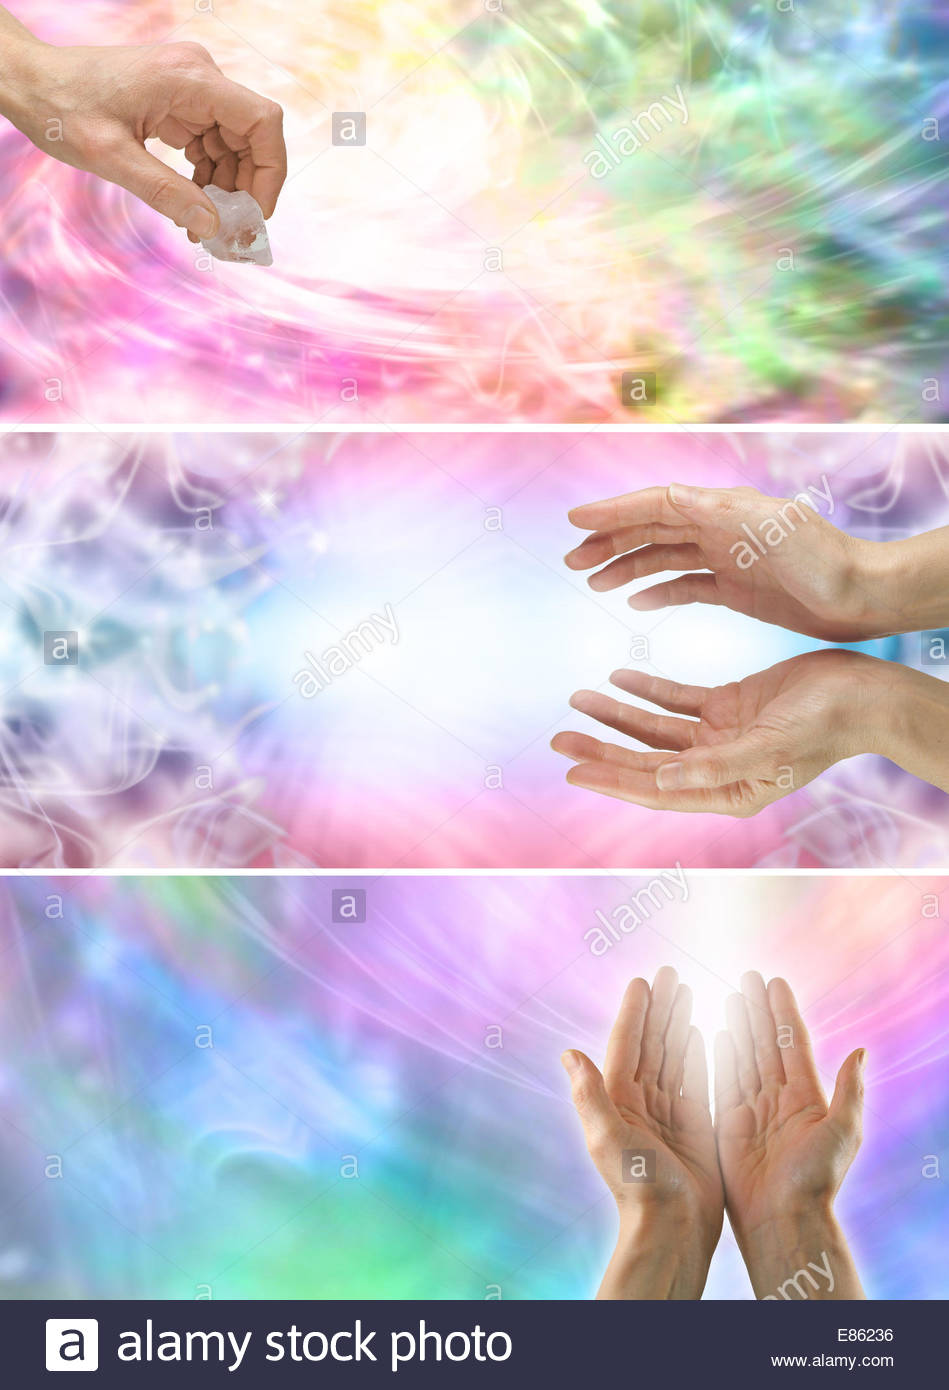 Three Different Healing Hands Website Banners With Rainbow Colored